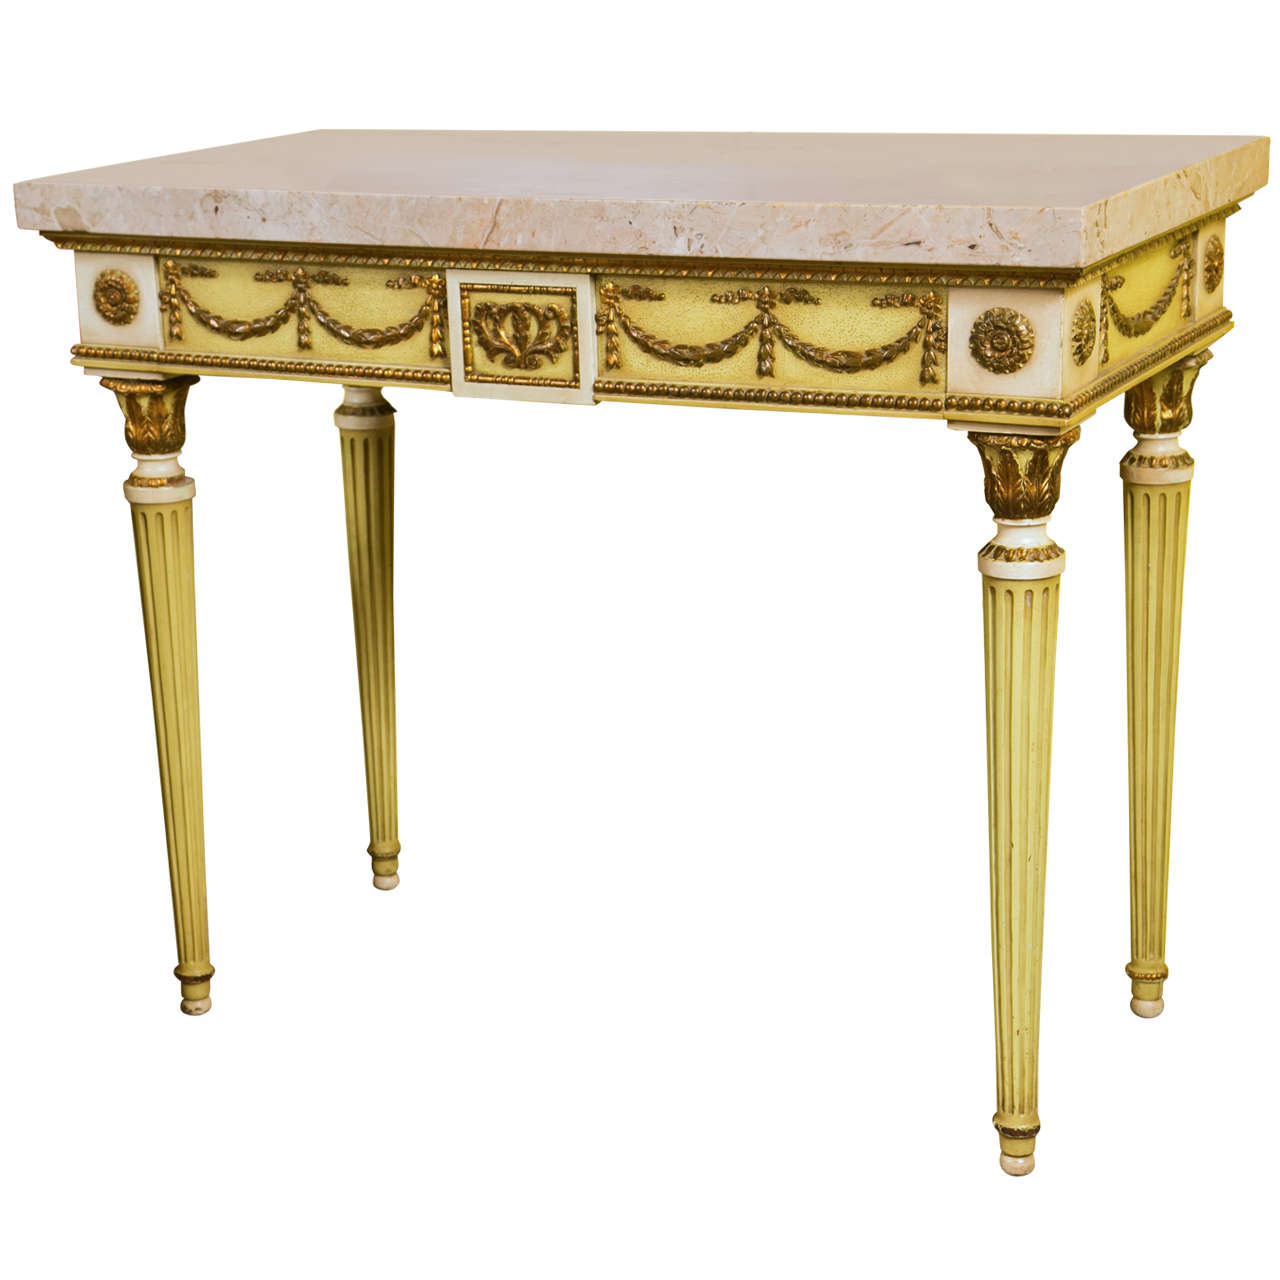 French Louis XIV Style Console Table With Thick Marble Top by Maison Jansen